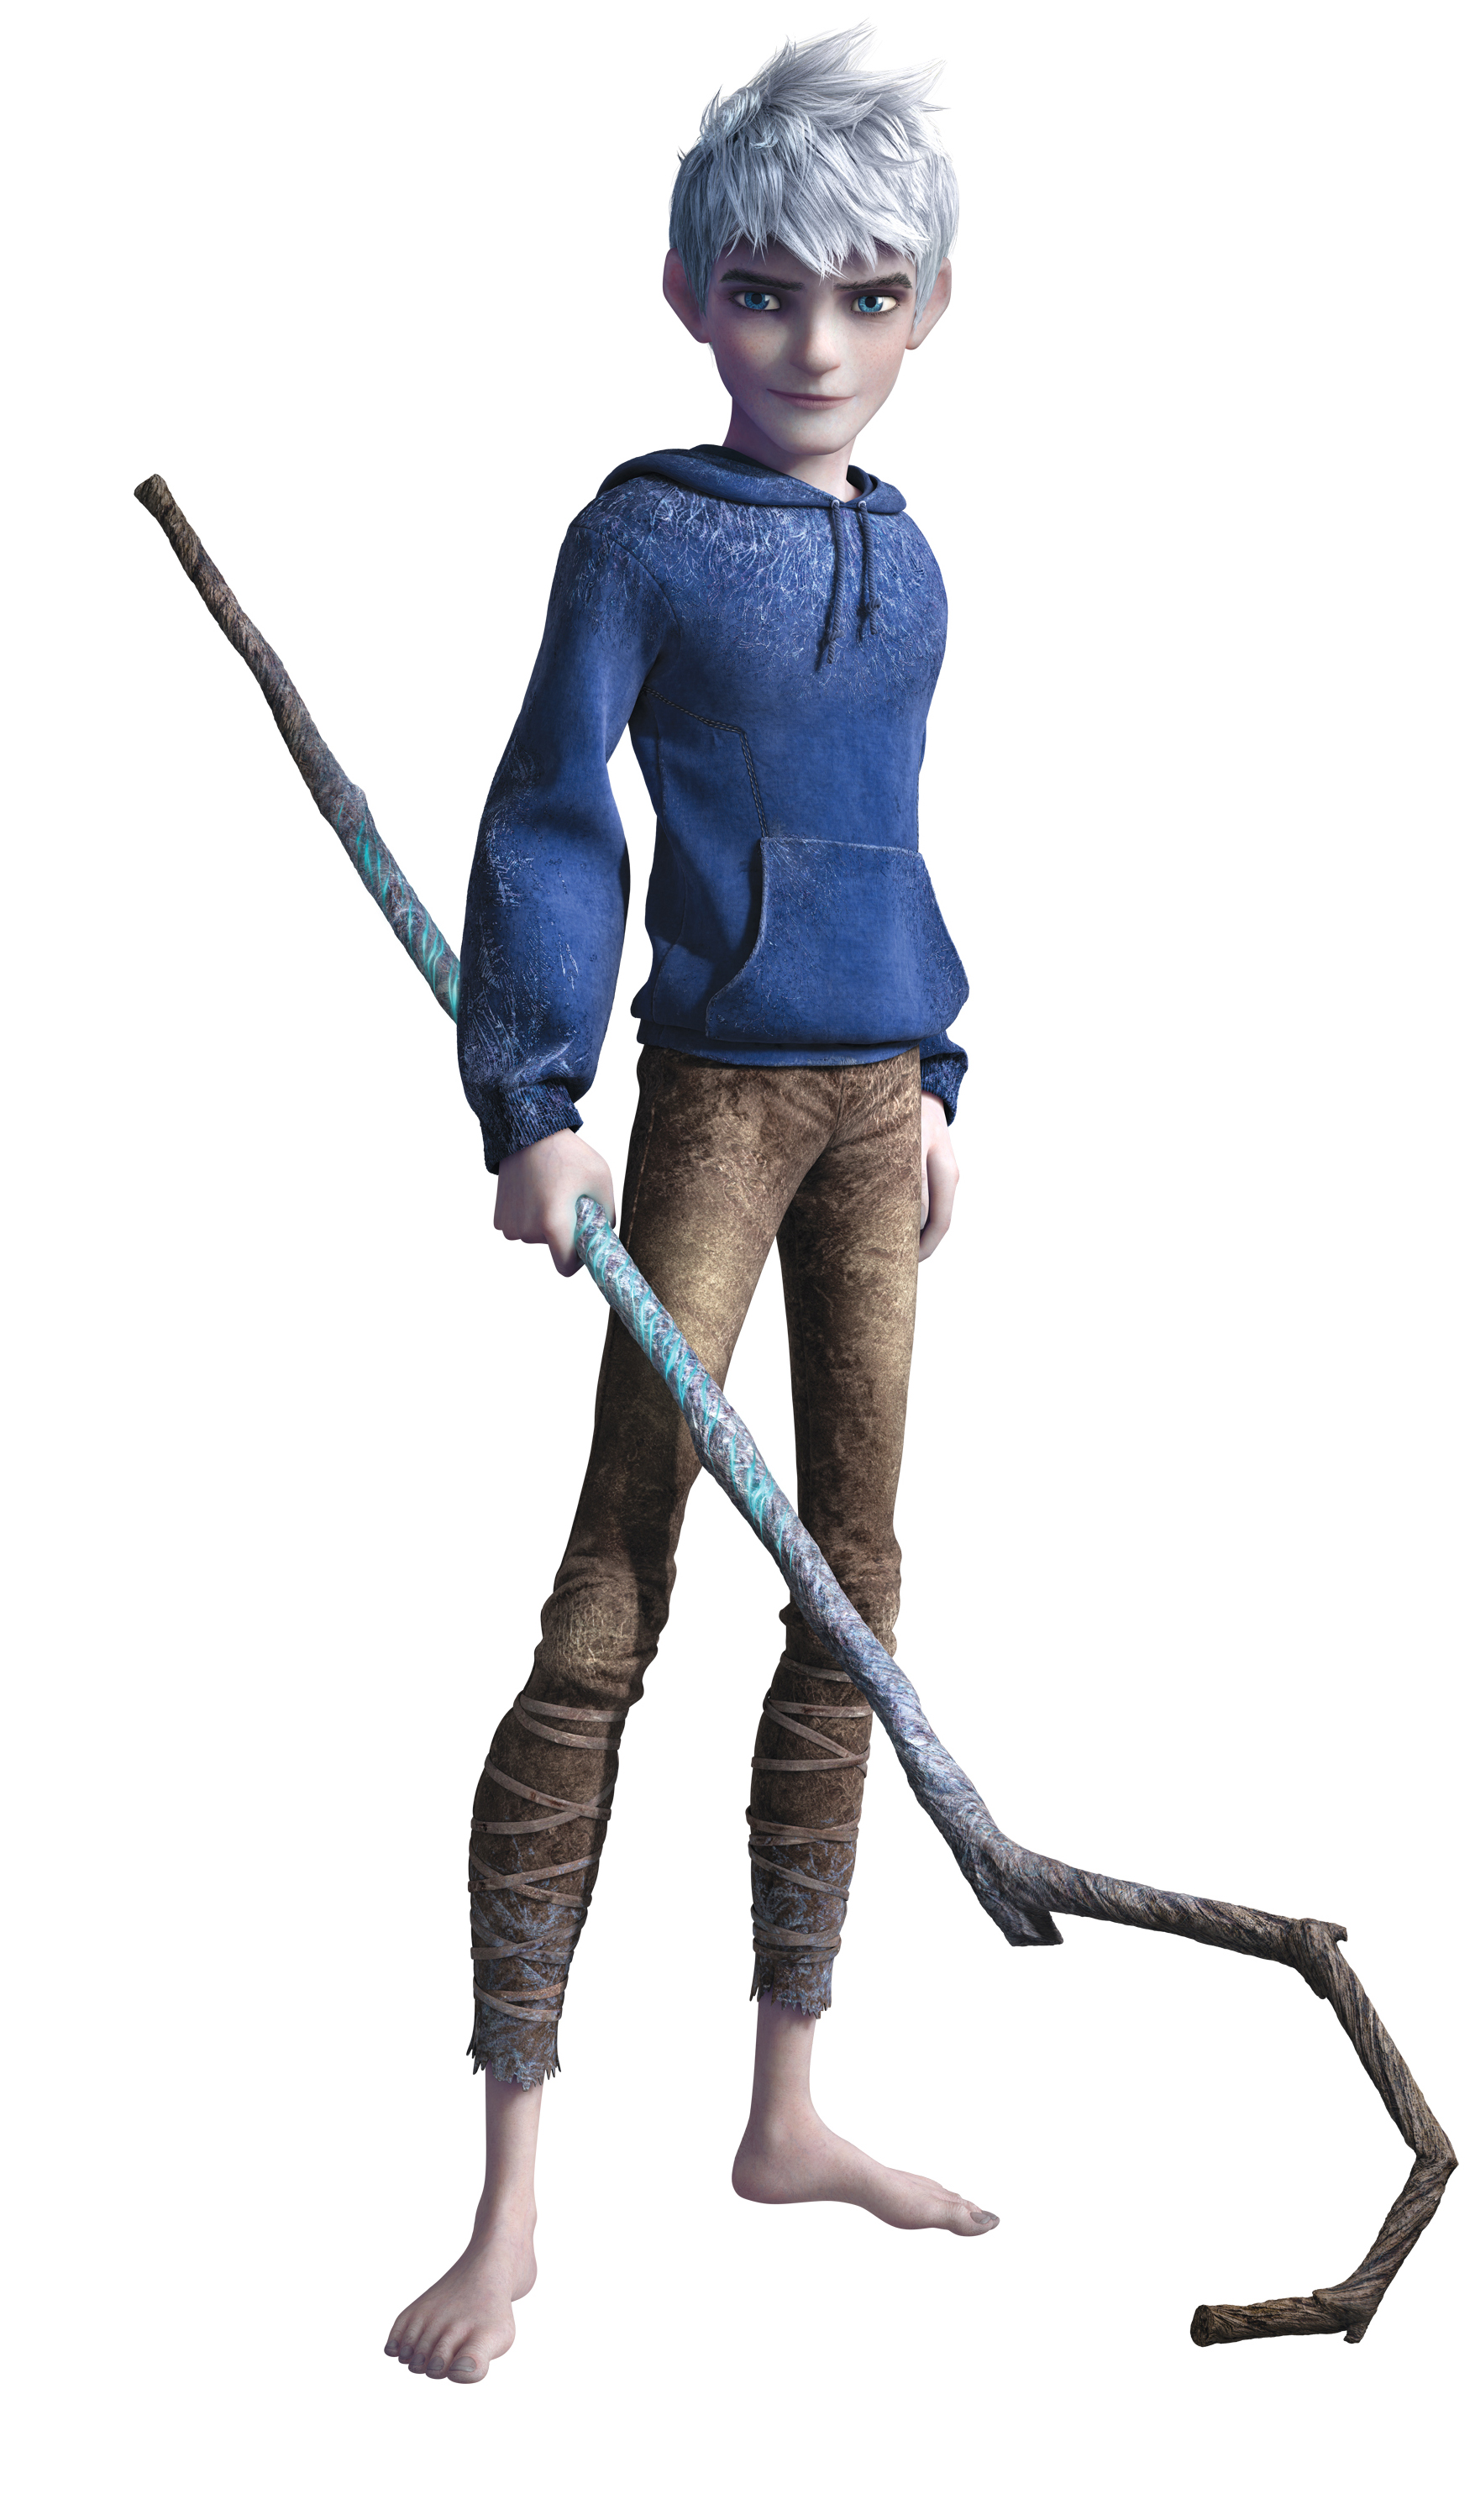 Jack Frost. Rise of the Guardians